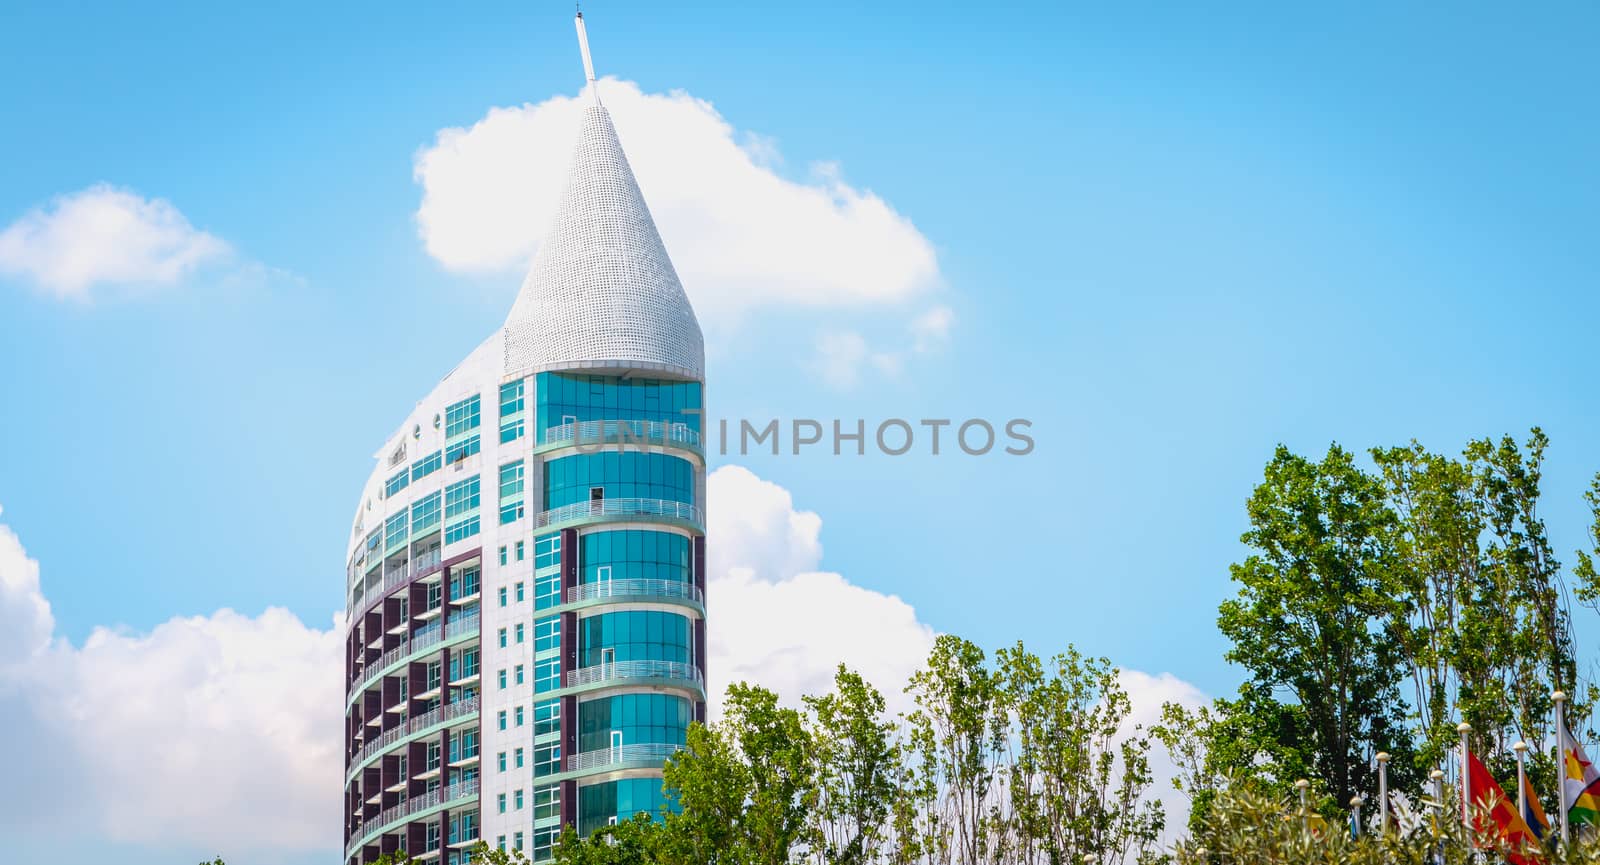 Lisbon, Portugal - May 7, 2018: Architectural detail of Sao Gabriel tower, at Parque das Nacoes (Park of Nations) in Lisbon on a spring day